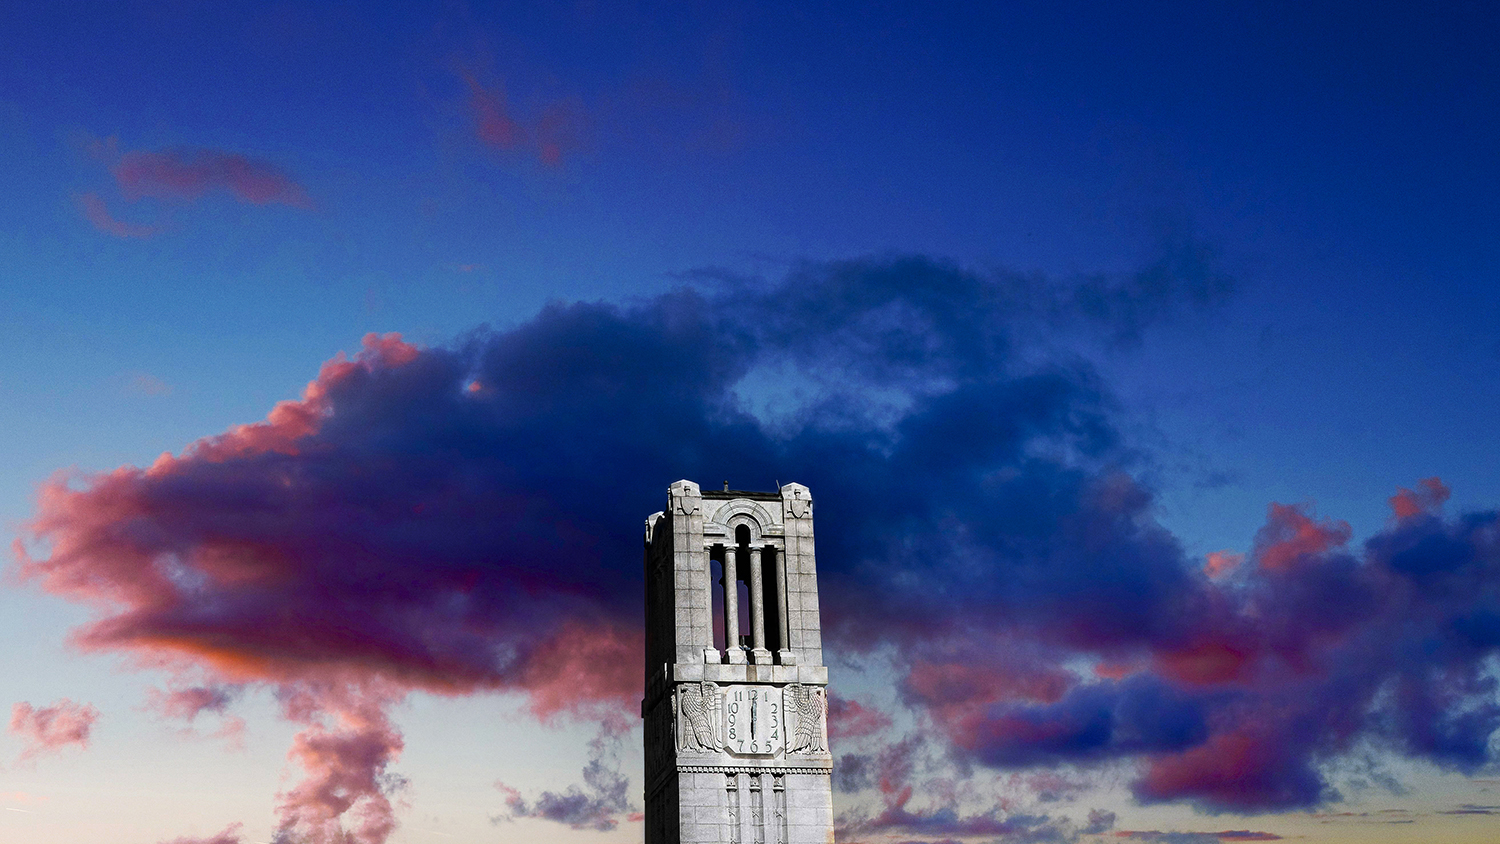 The Belltower against colorful clouds at sunset.